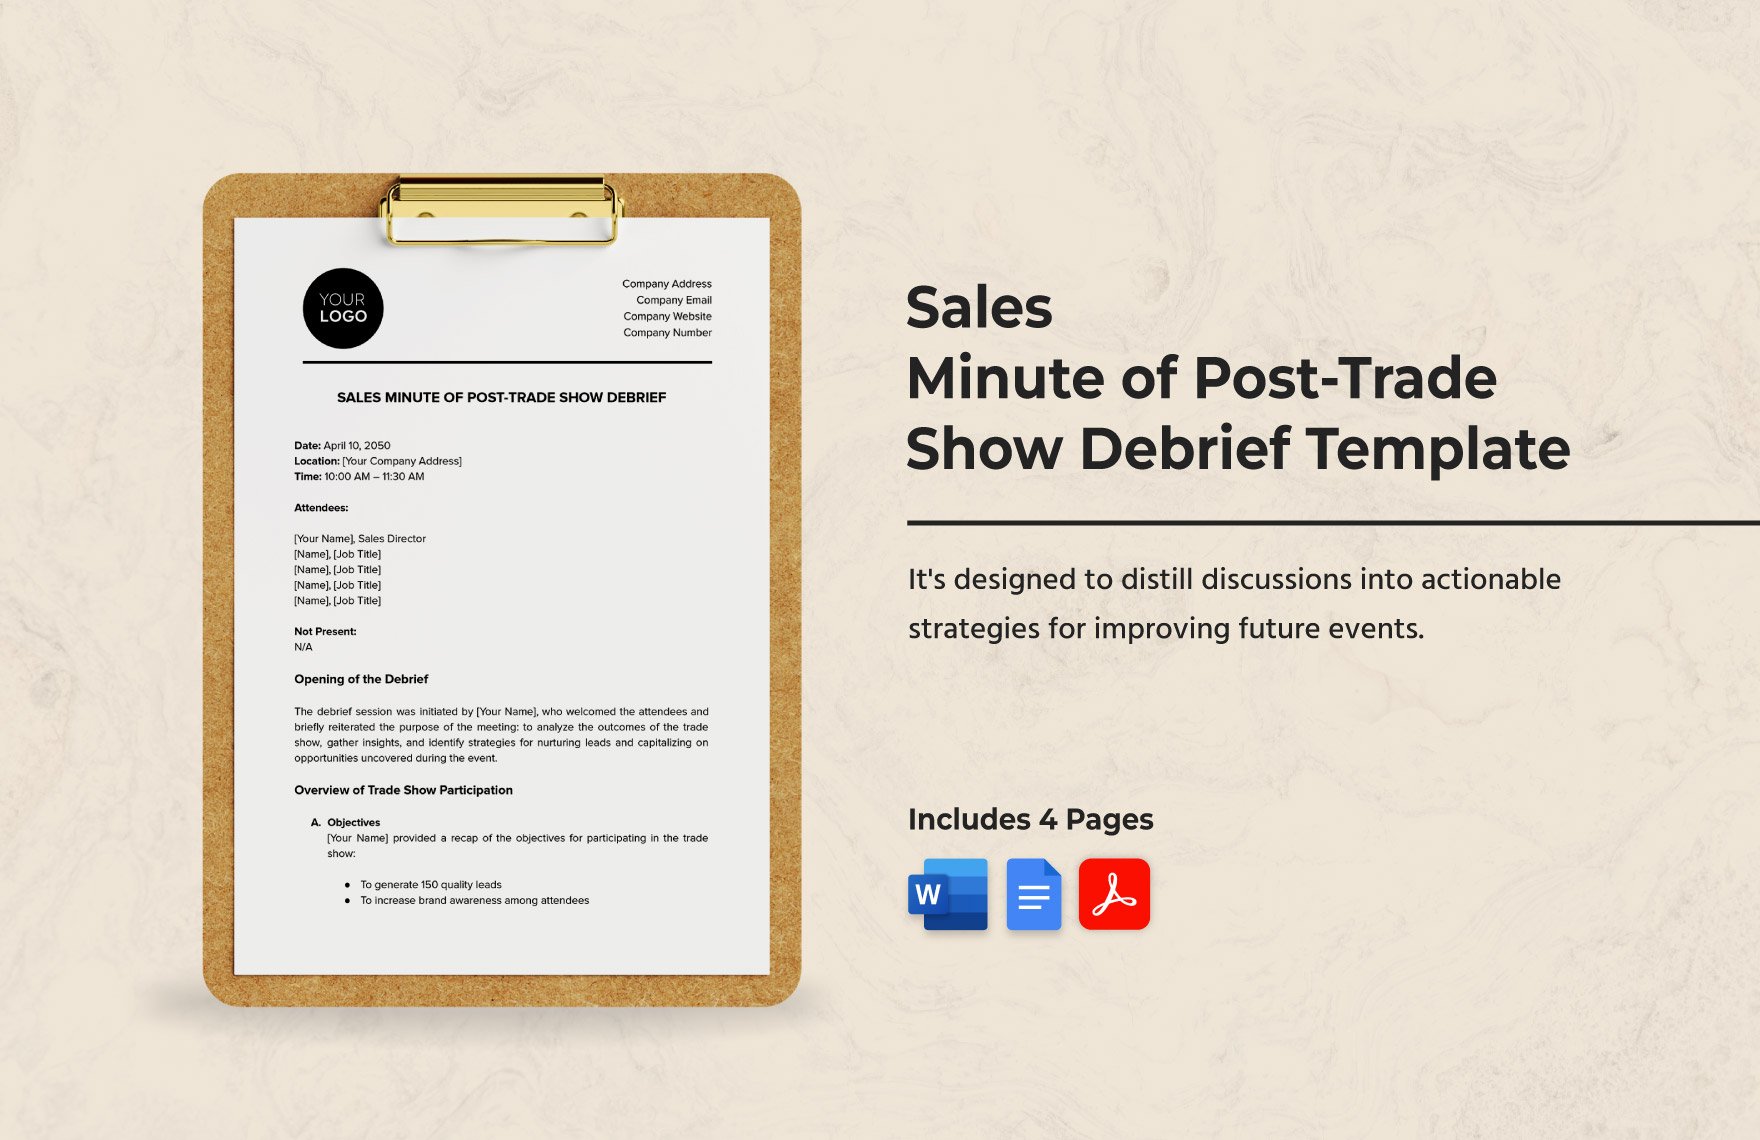 Sales Minute of Post-Trade Show Debrief Template